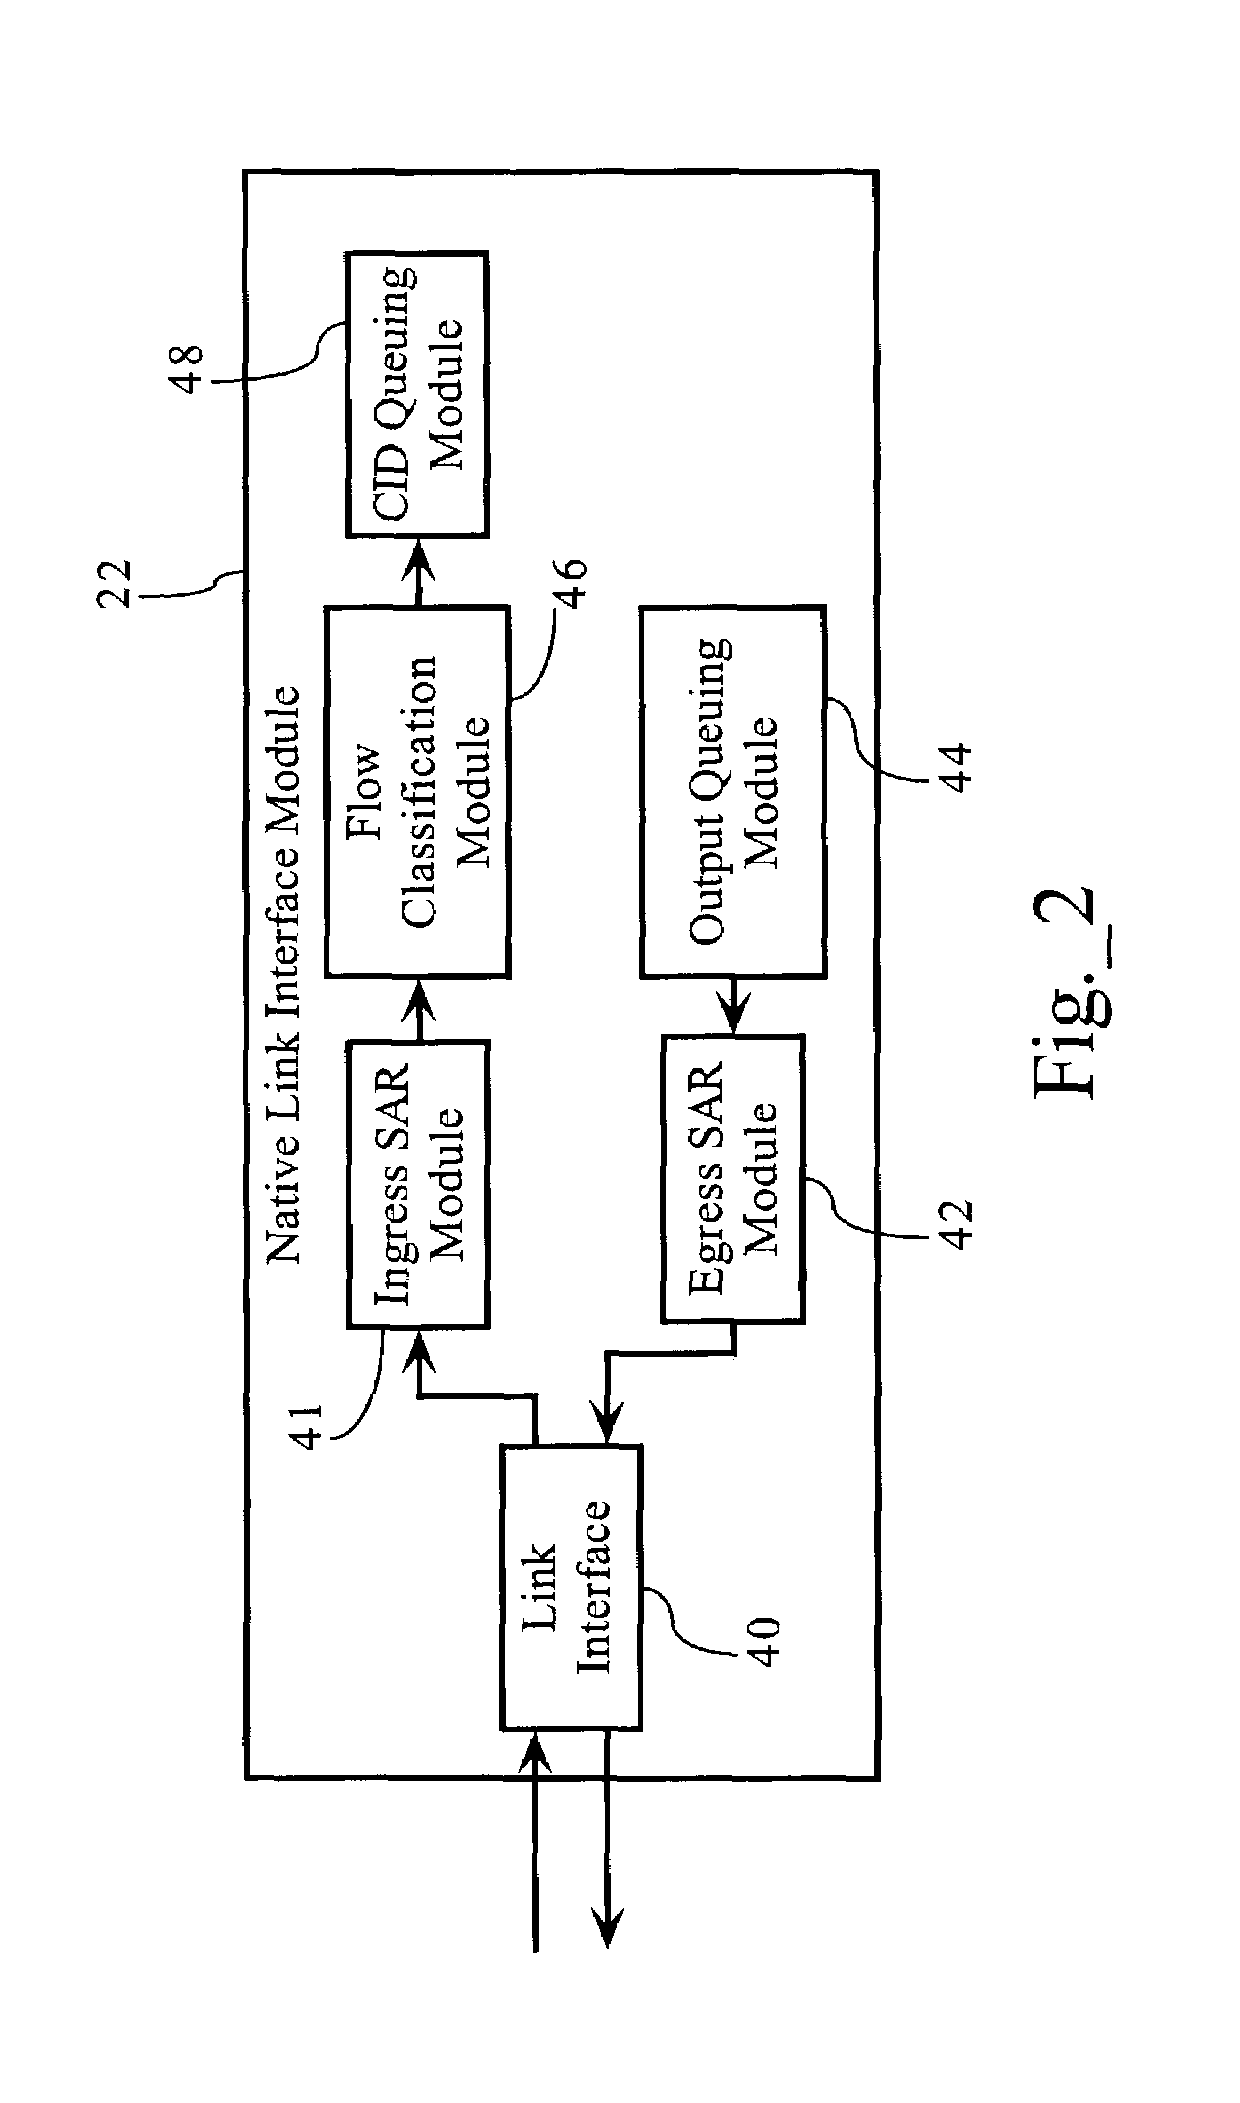 Methods, apparatuses and systems facilitating data transmission across bonded communications paths